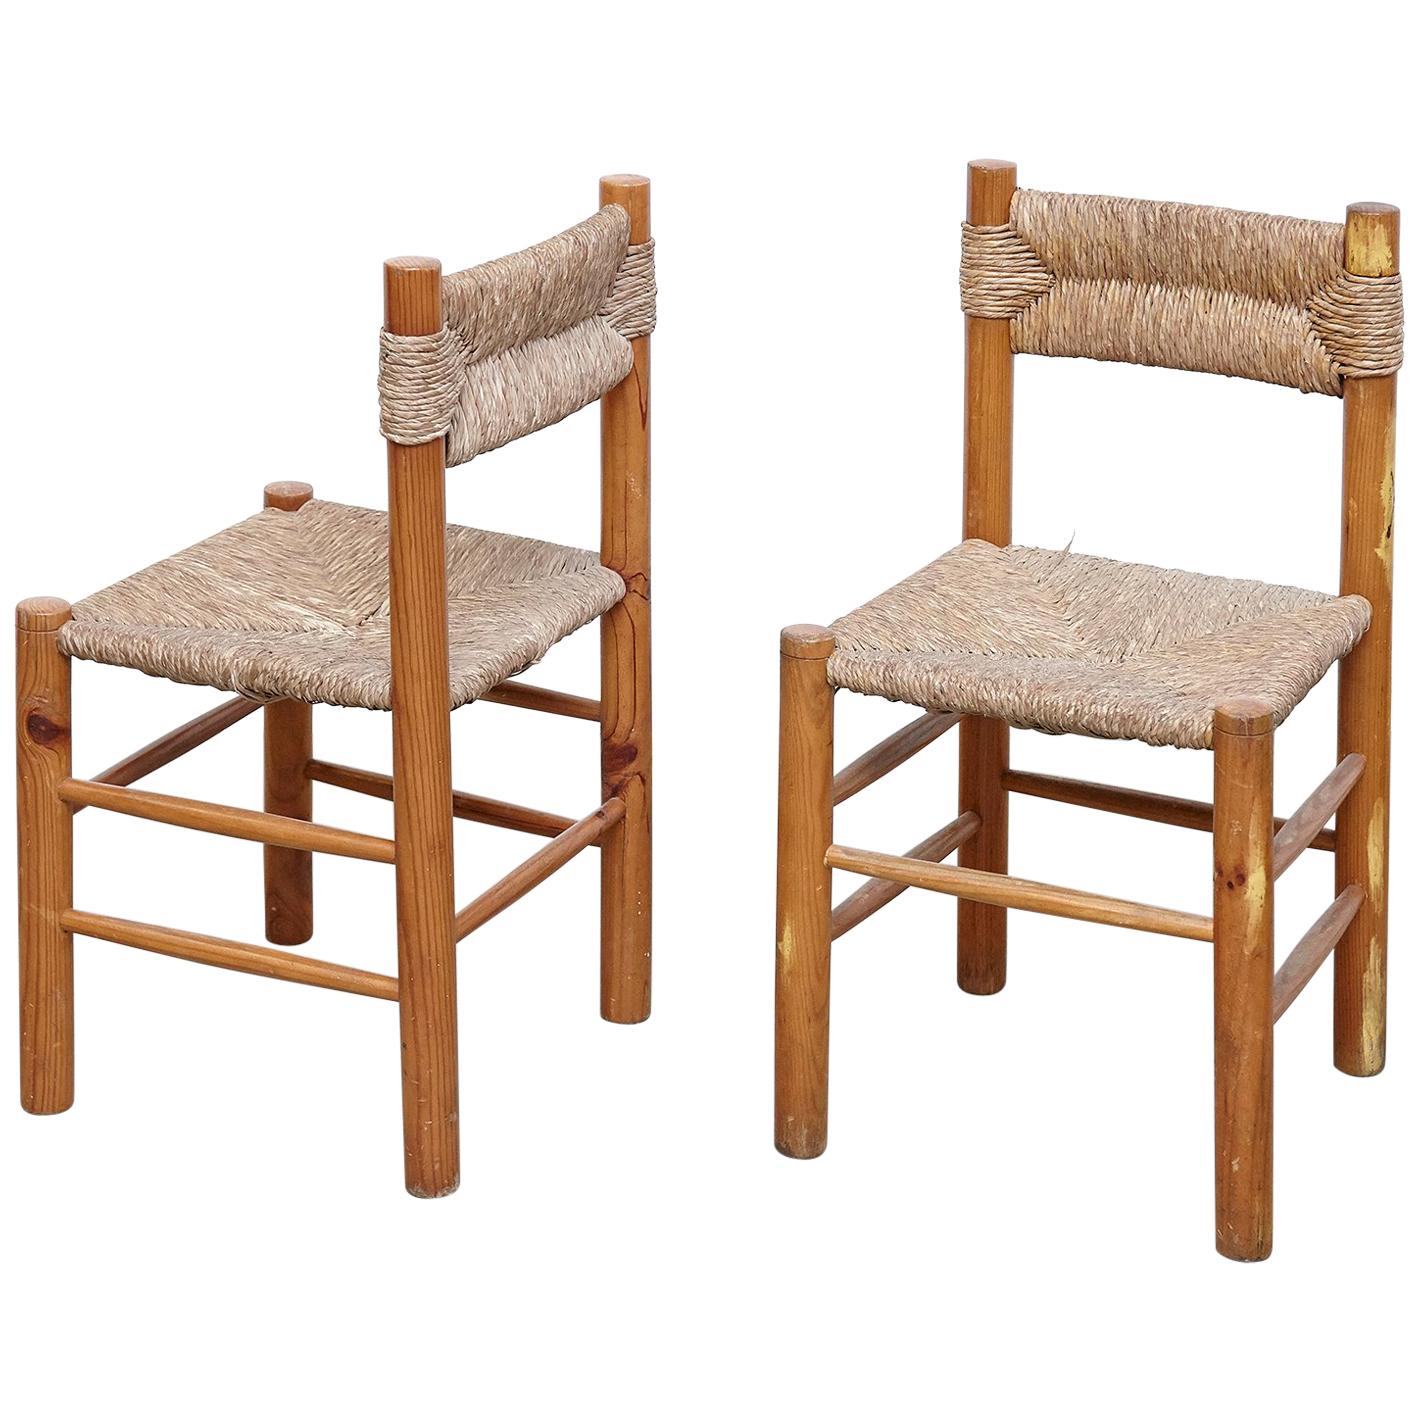 Pair of Chairs After Charlotte Perriand, Wood Rattan, Mid Century Modern